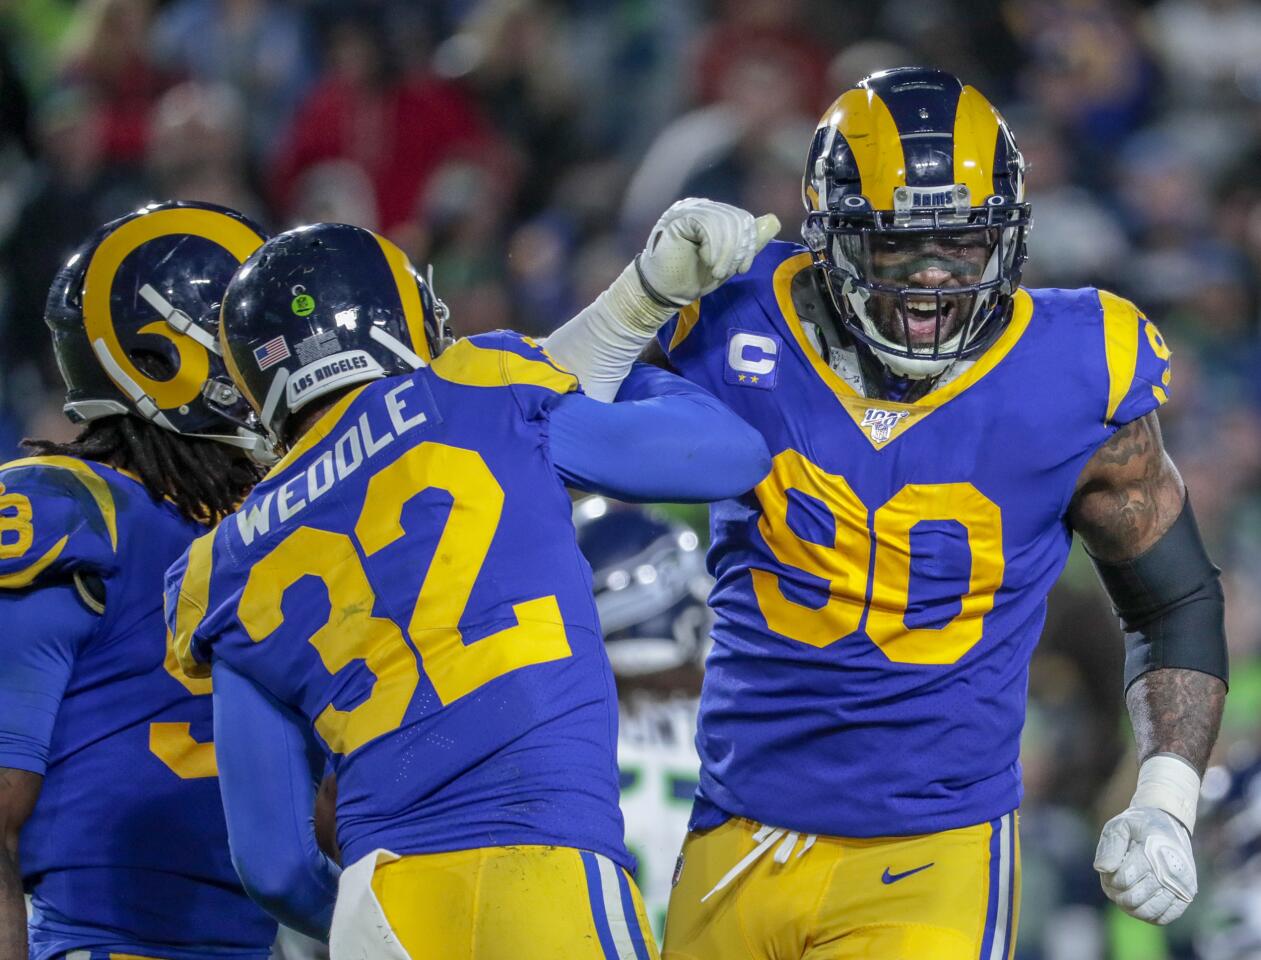 Rams free safety Eric Weddle and defensive end Michael Brockers celebrate after stopping a Seahawks drive.